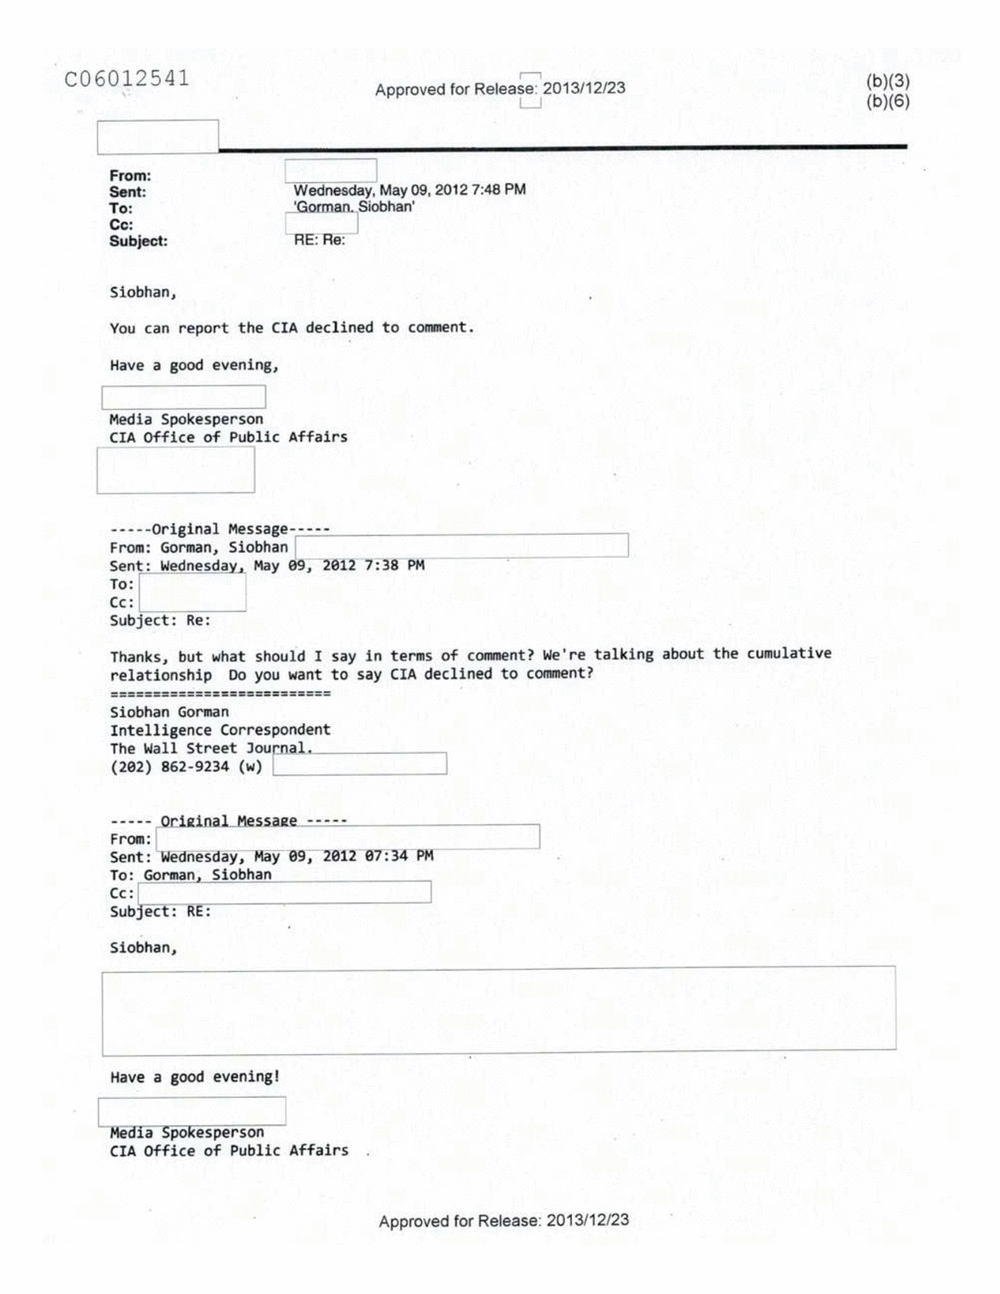 Page 73 from Email Correspondence Between Reporters and CIA Flacks